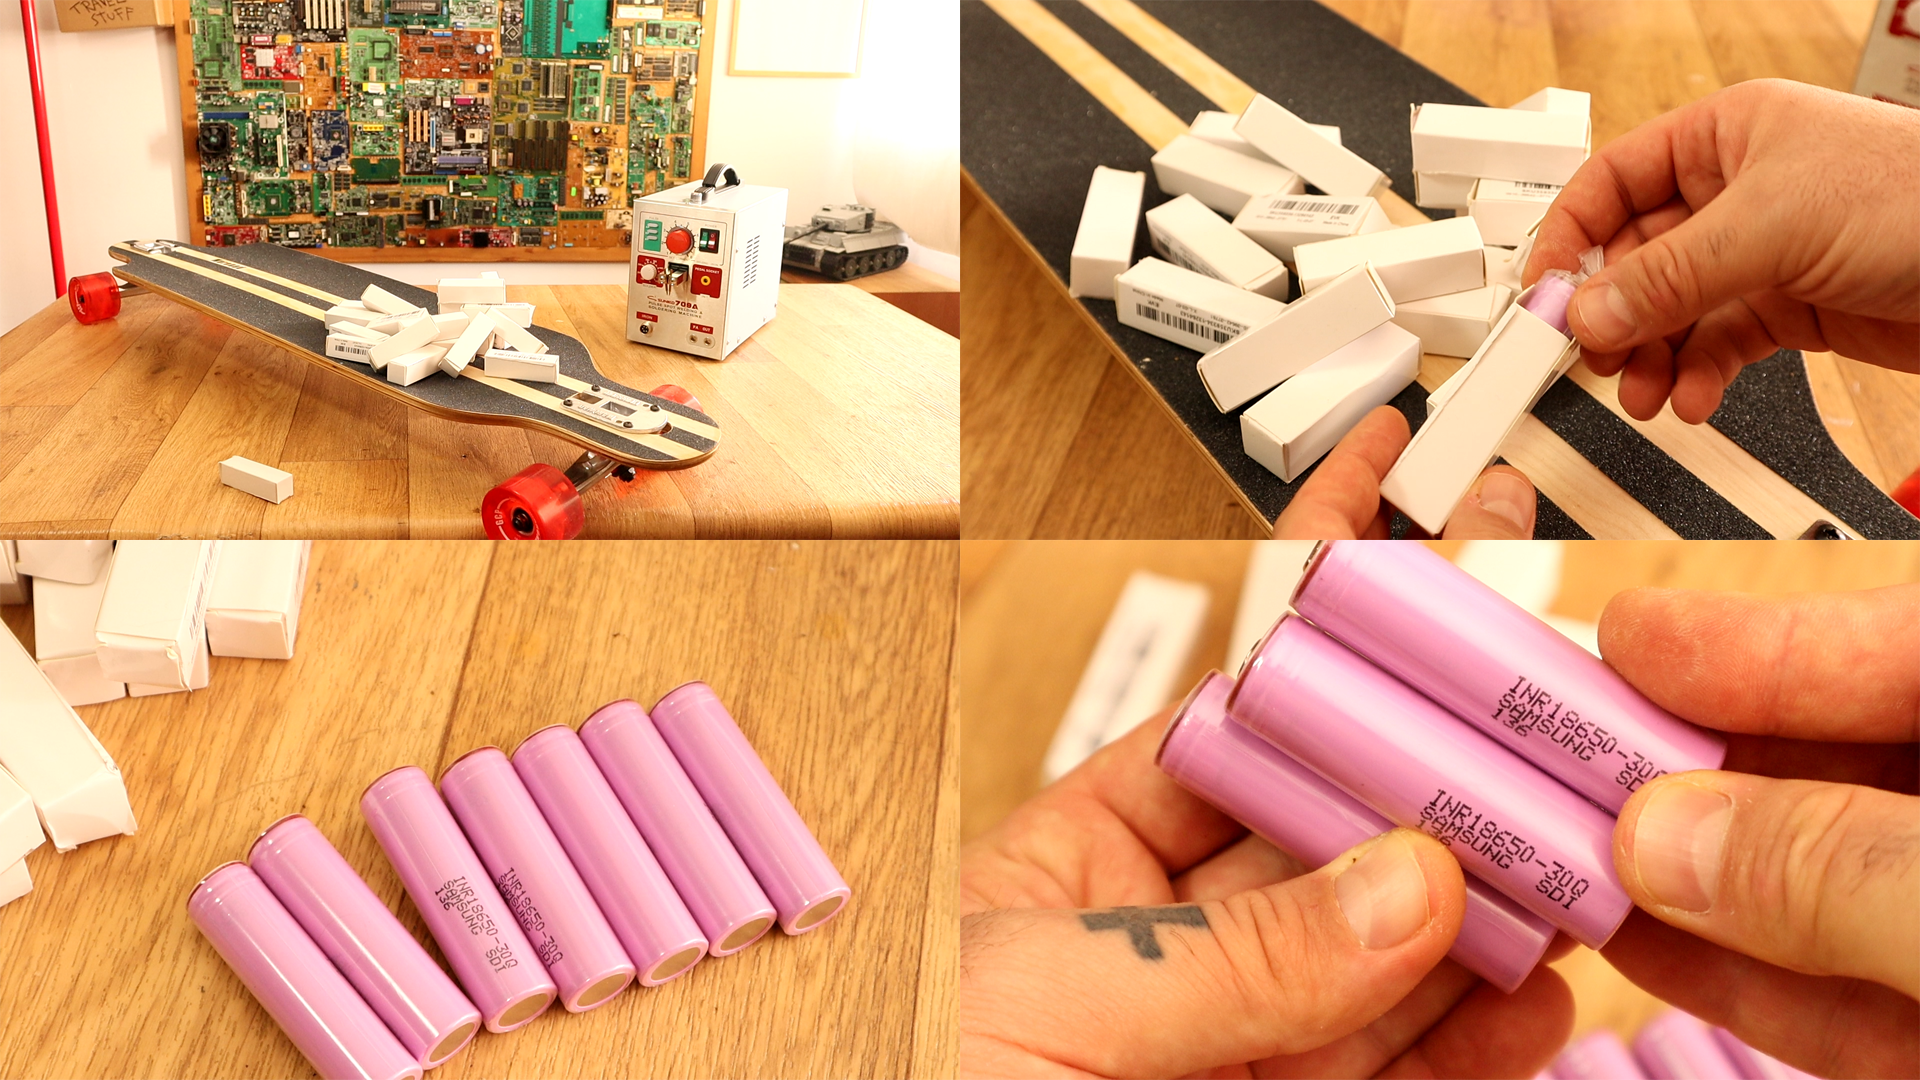 DIY Liion 6S battery pack